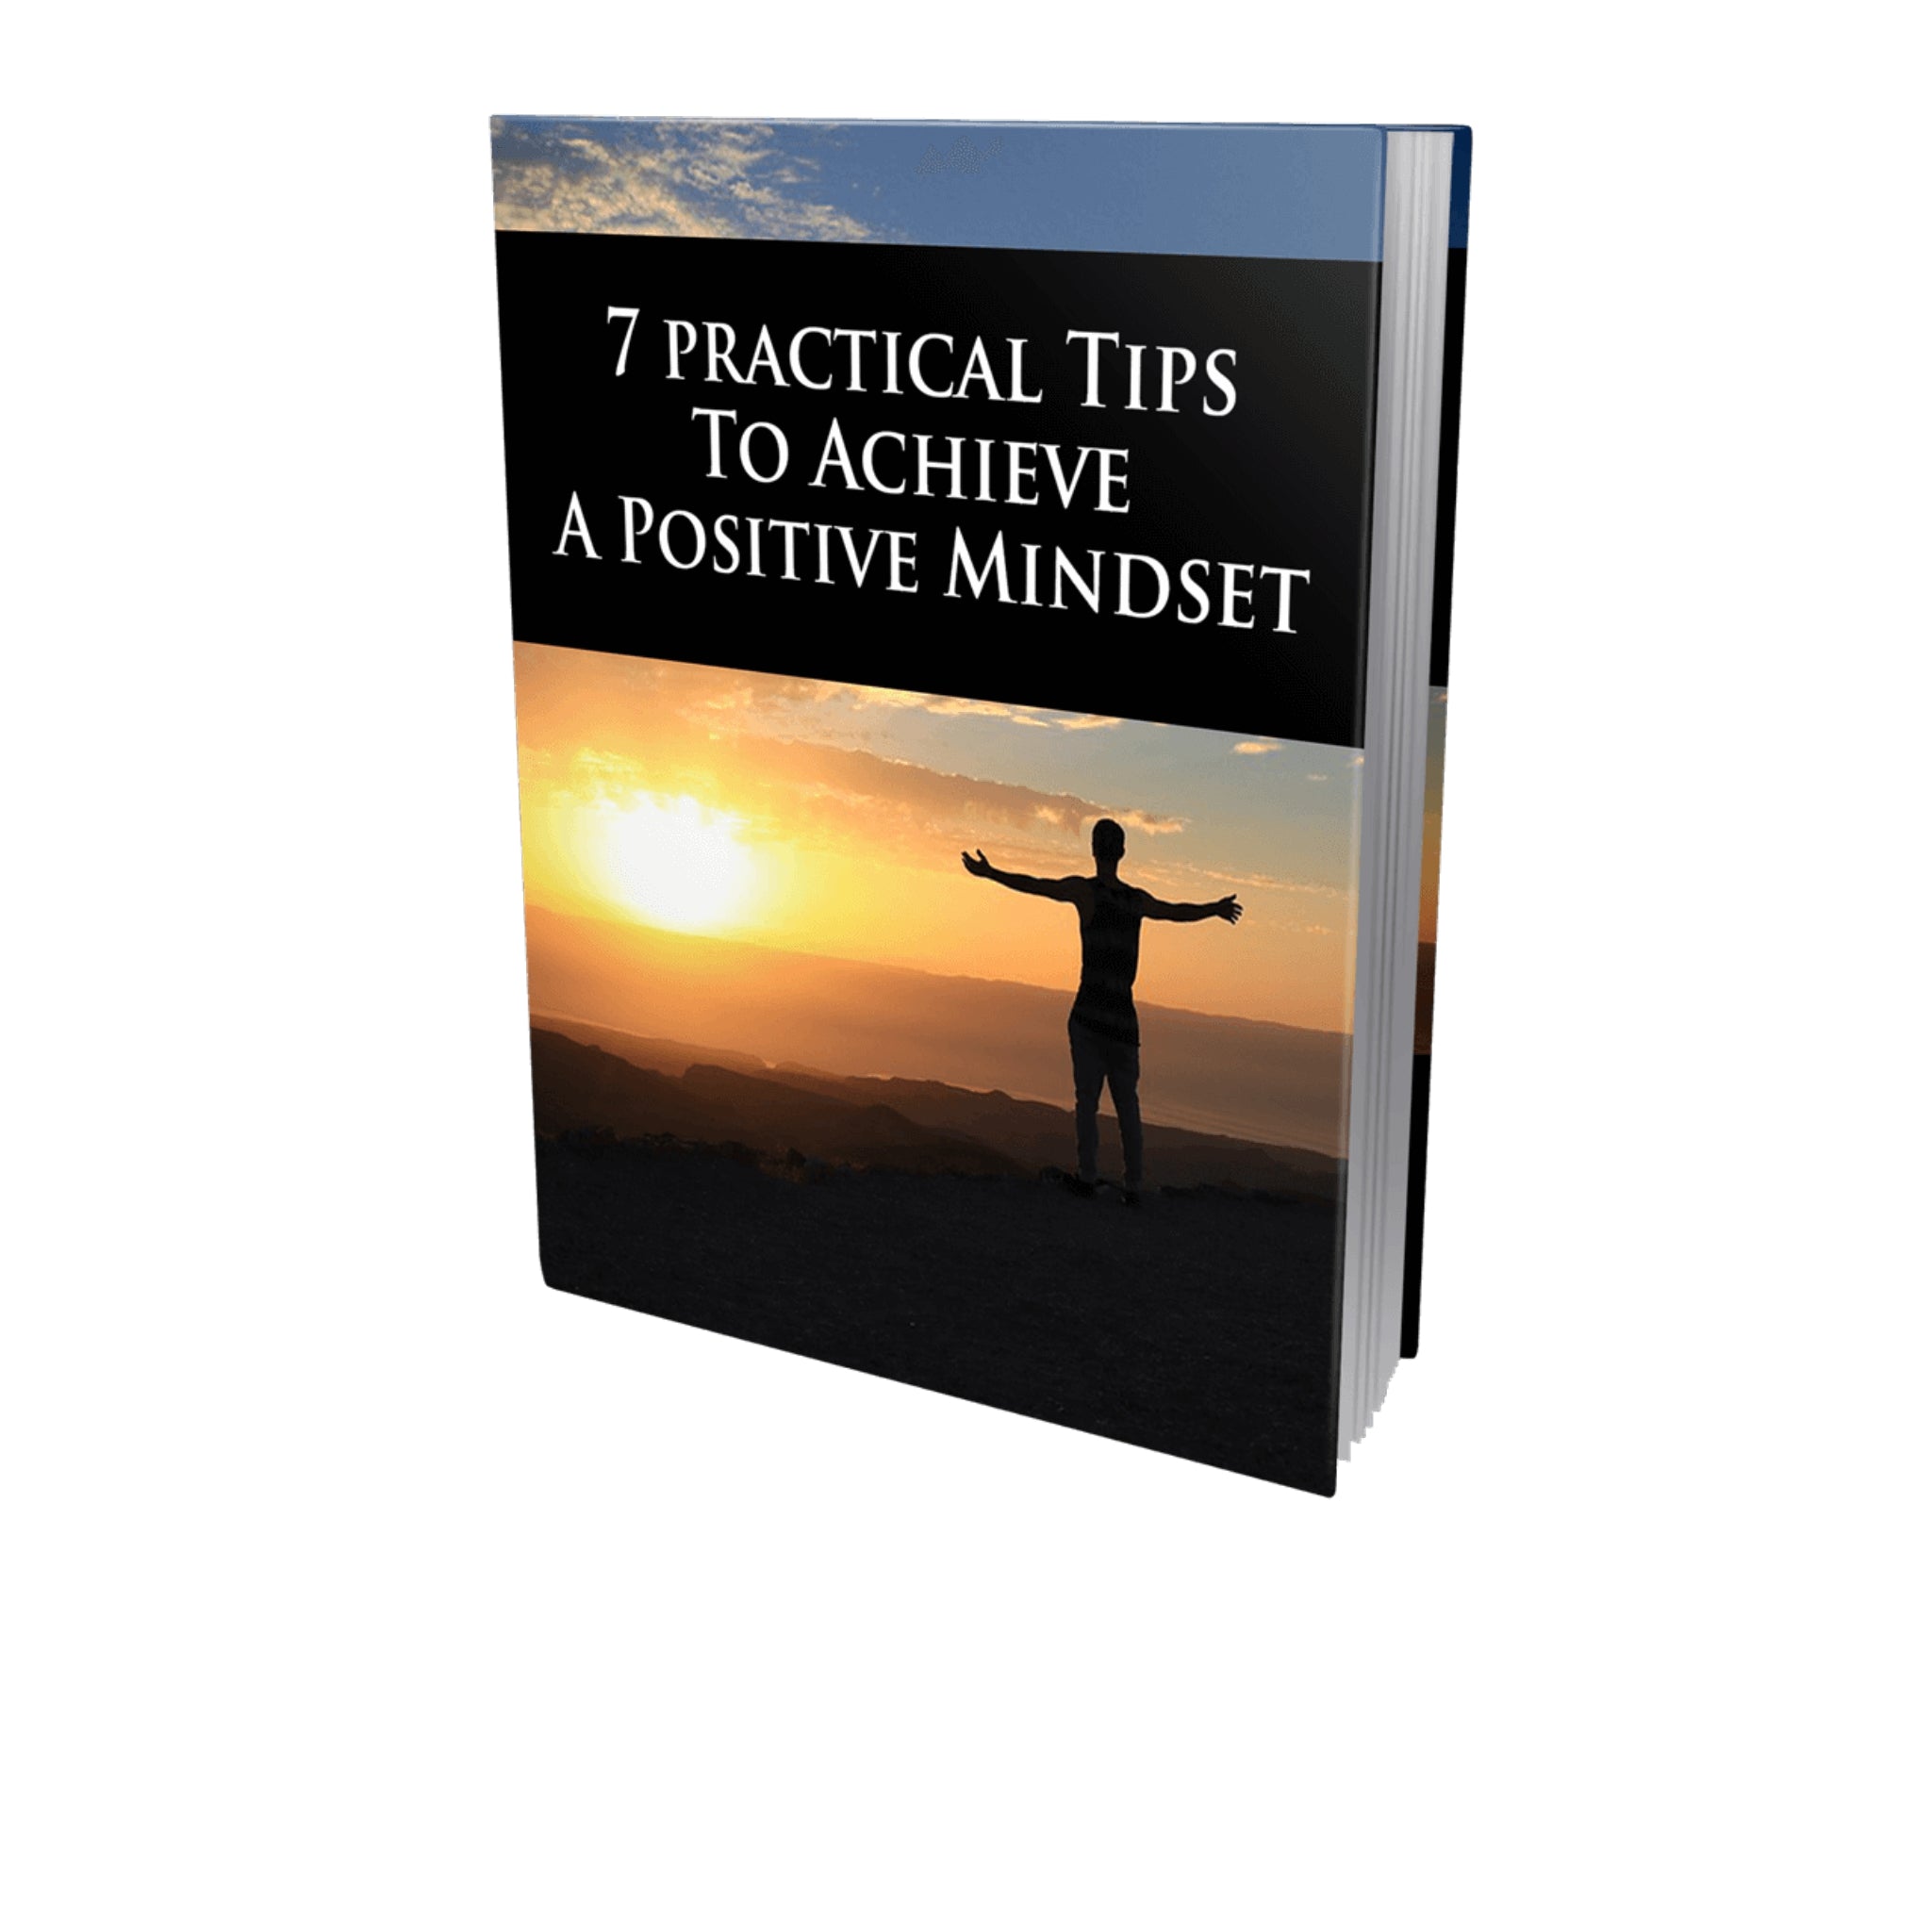 7 Practical Tips To Achieve a Positive Mindset Ebook